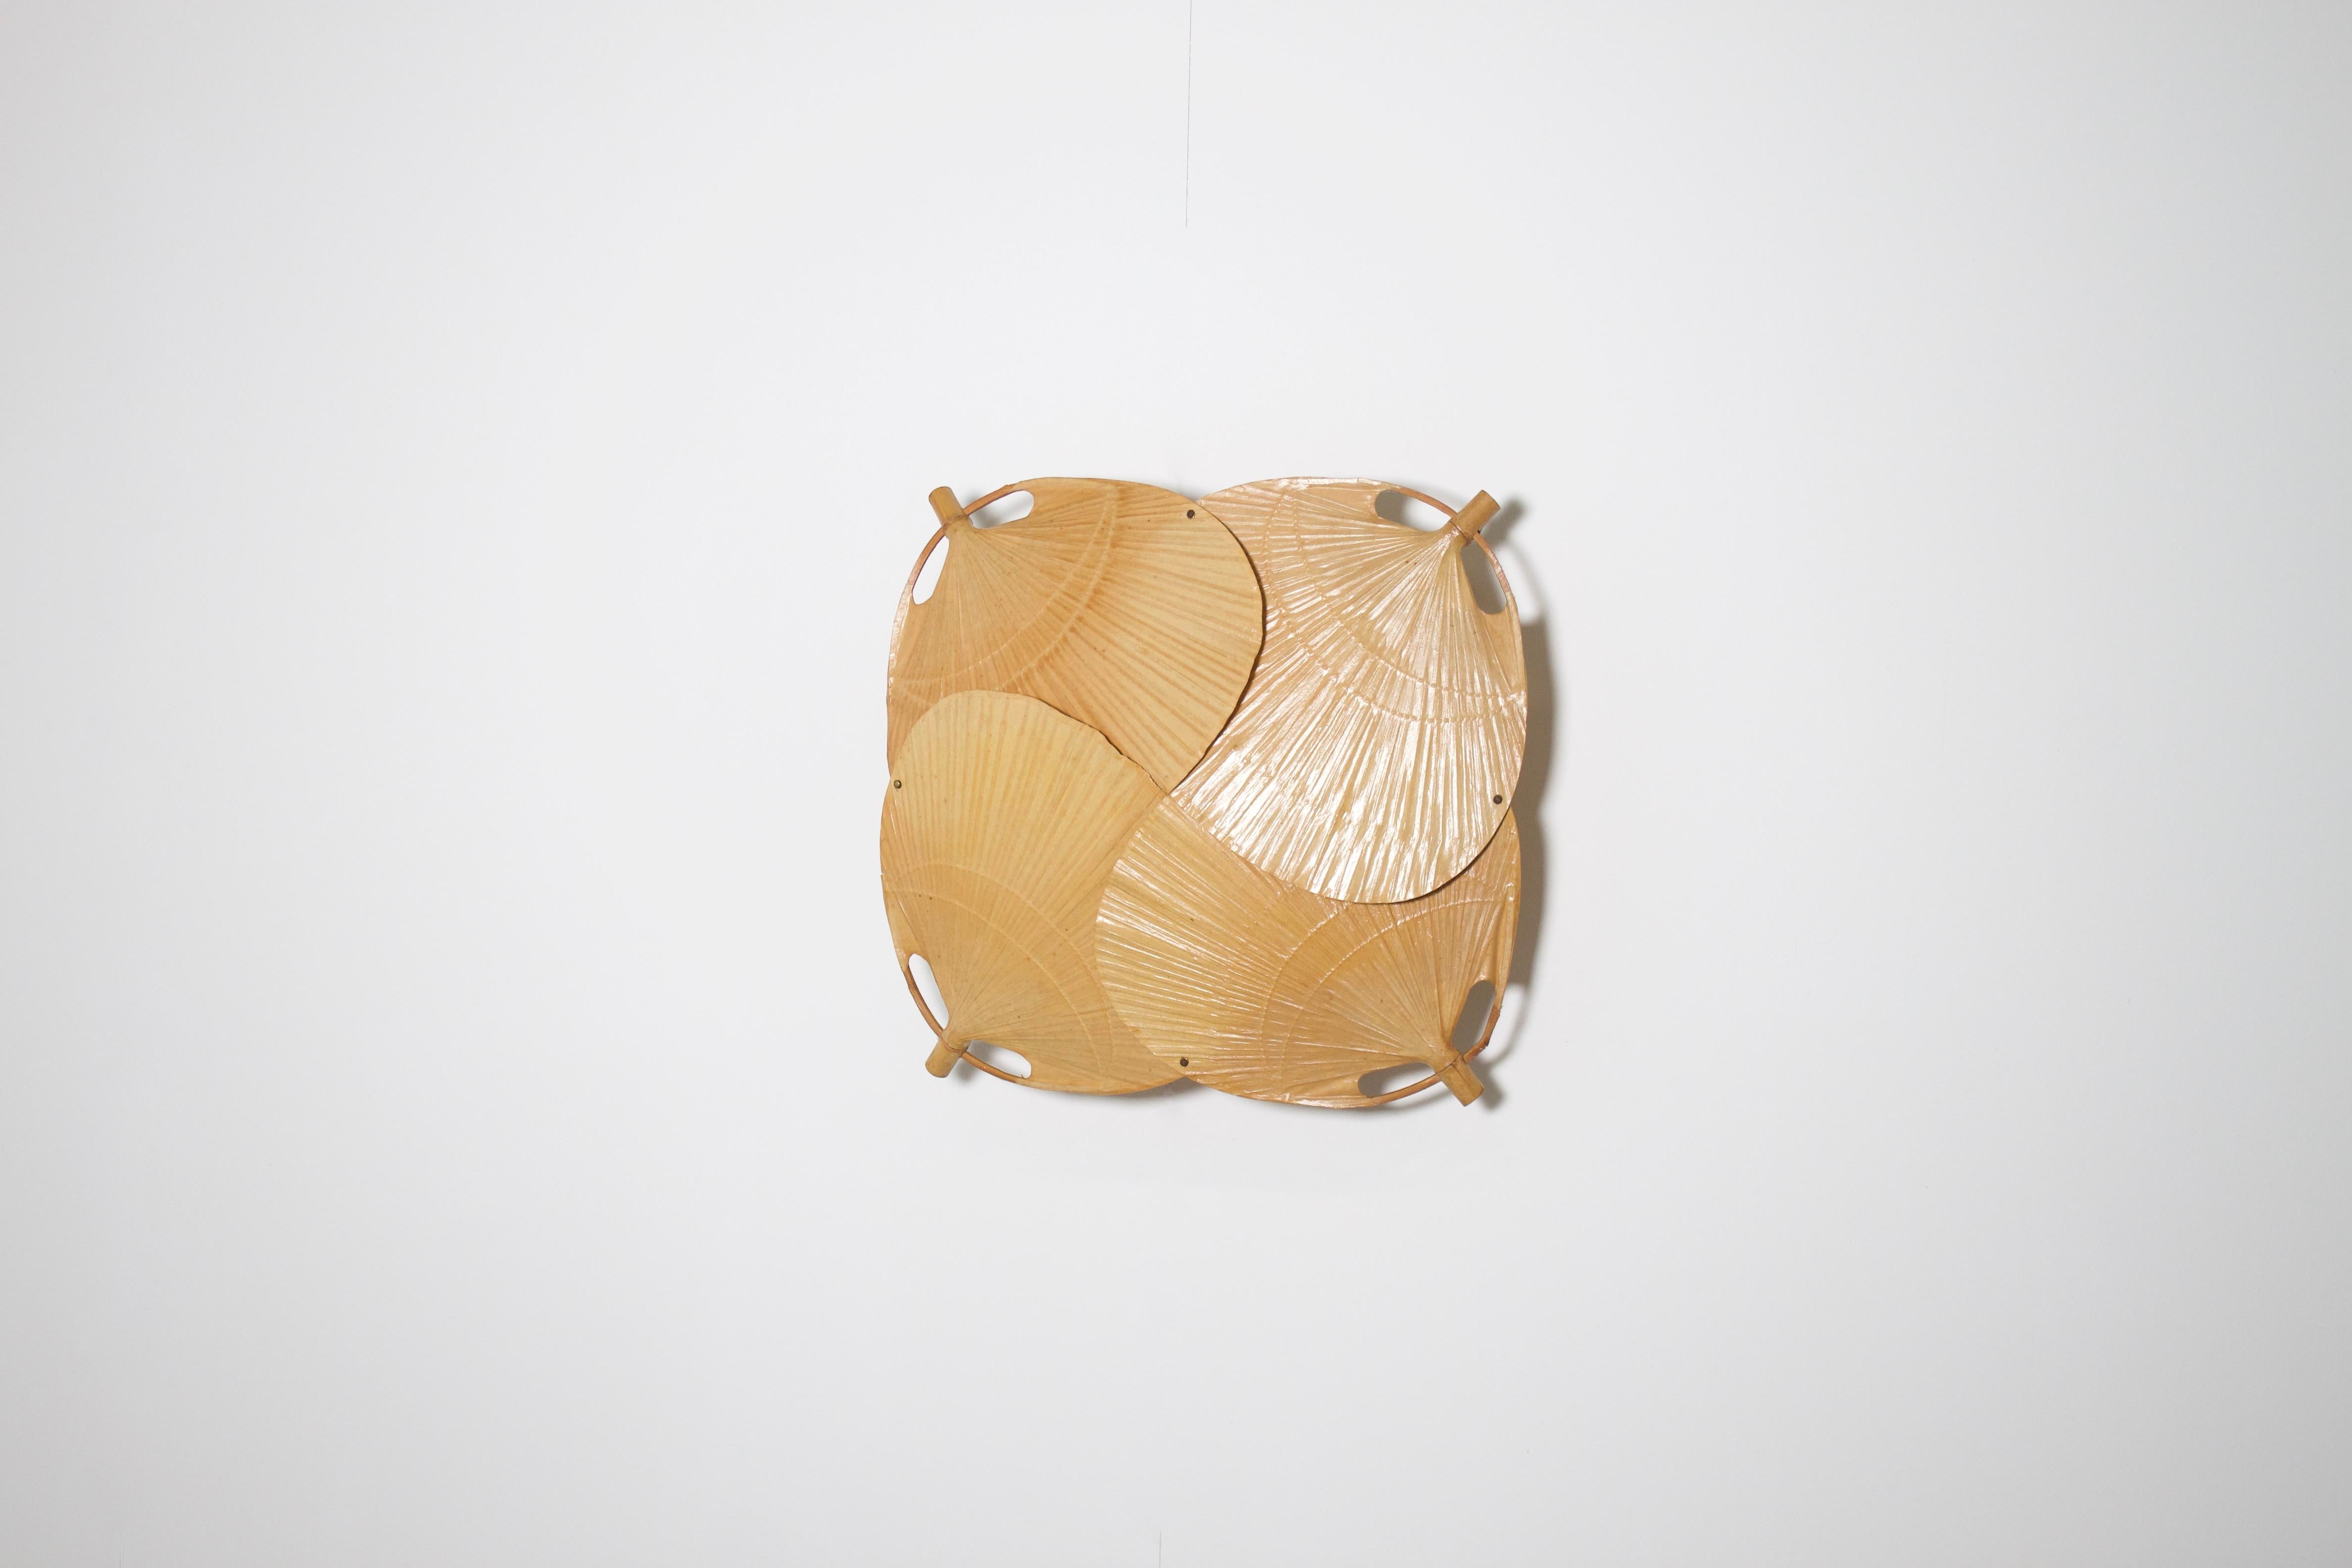 Large ‘Yotsuba’ wall light in very good condition.

Designed by Ingo Maurer in the 1970s 

Manufactured by M Design, Germany

The 'Yotsuba' is handmade from bamboo and Japanese rice paper and is connected to the wall with a metal frame

The